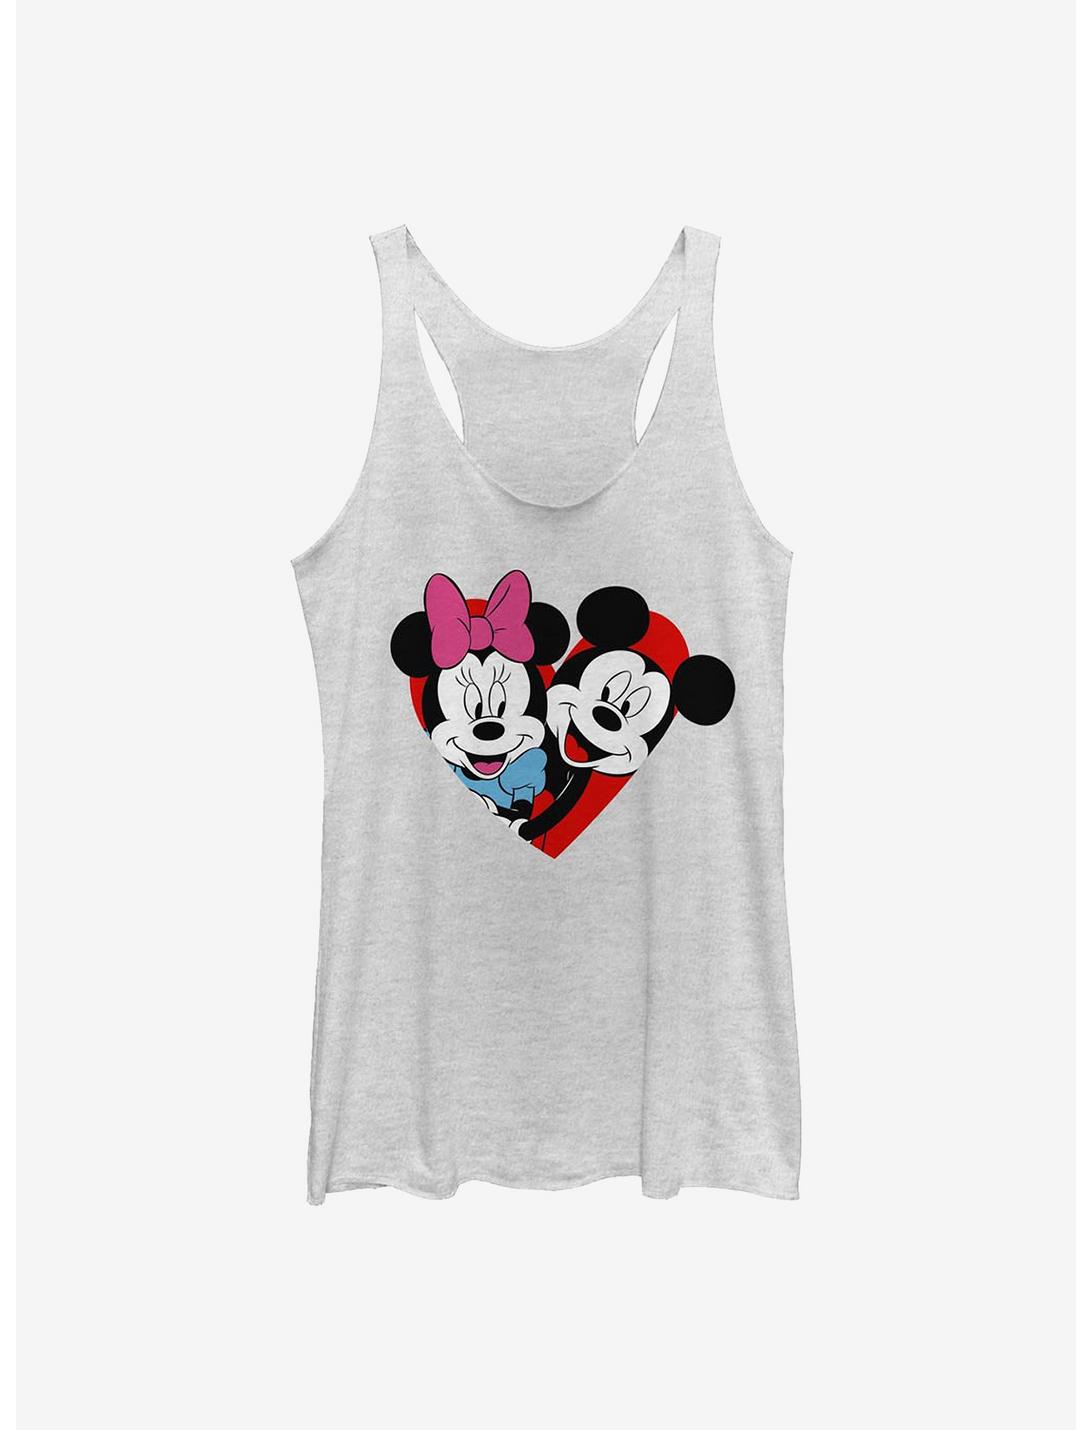 Disney Mickey Mouse & Minnie Mouse Heart Girls Tank Top, WHITE HTR, hi-res